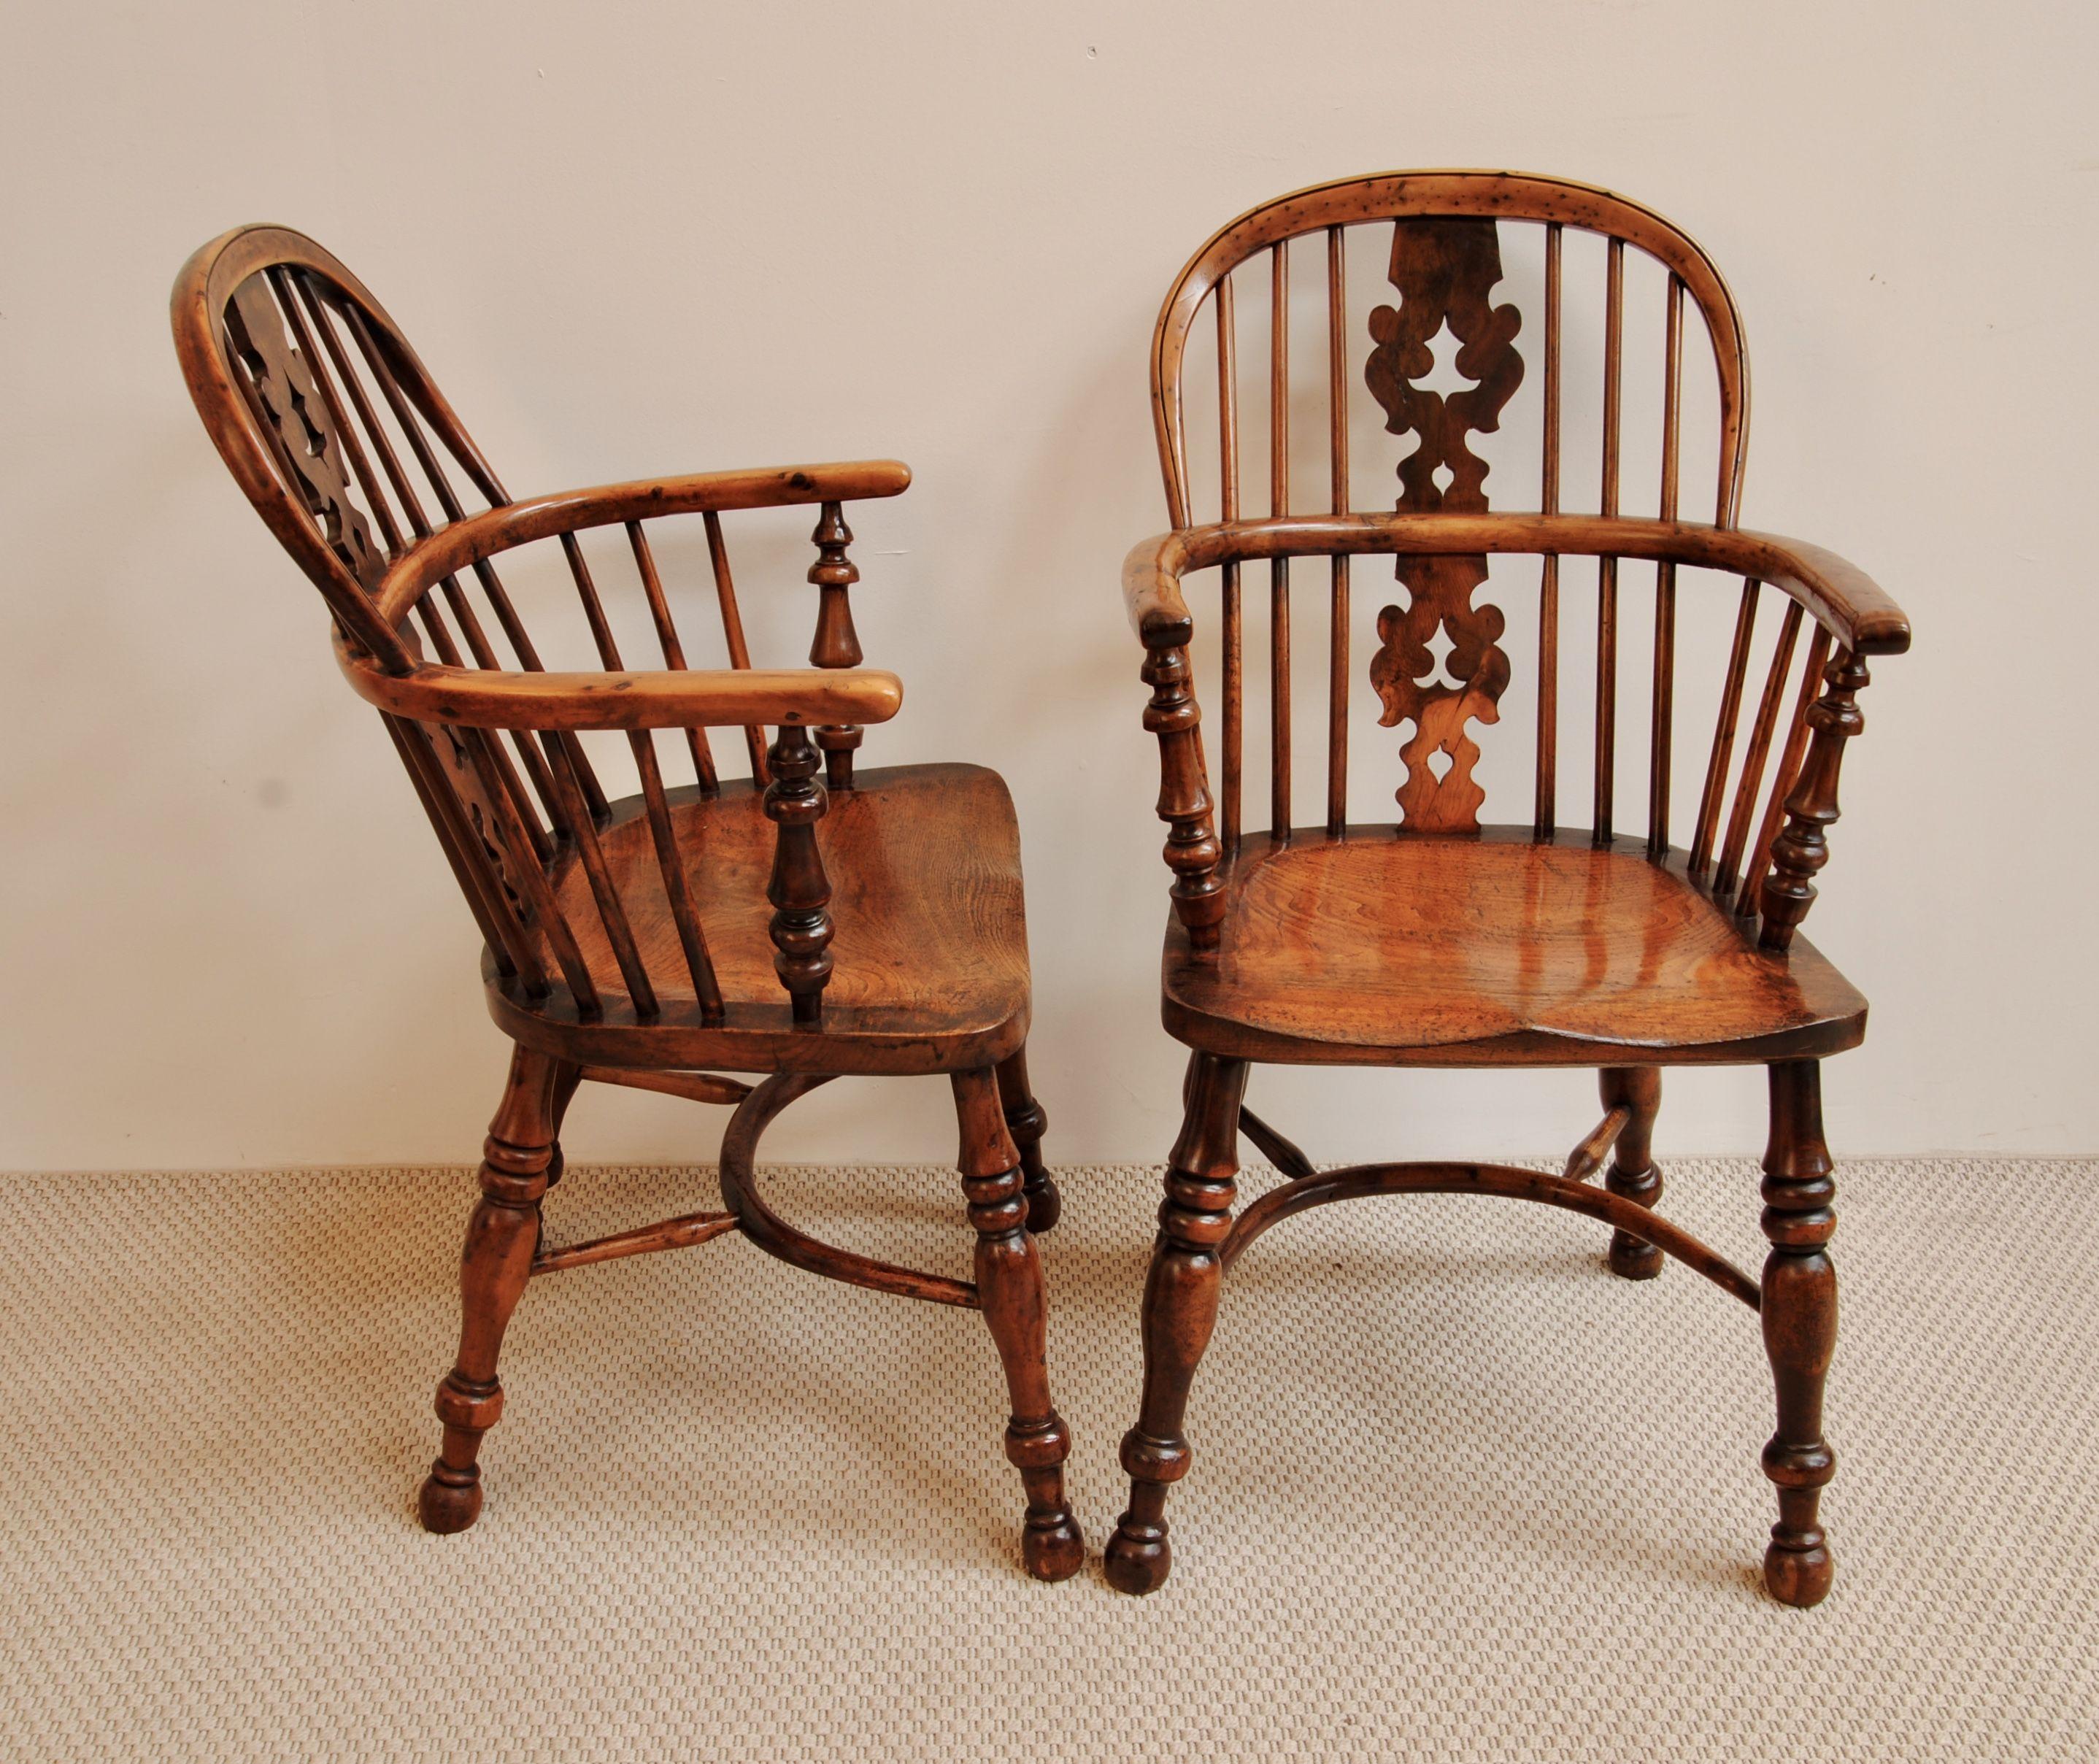 An exceptional pair of 19th century burr yew tree Nottinghamshire Windsor chairs with Christmas tree splats, this model was known in the makers books as the finest!

 